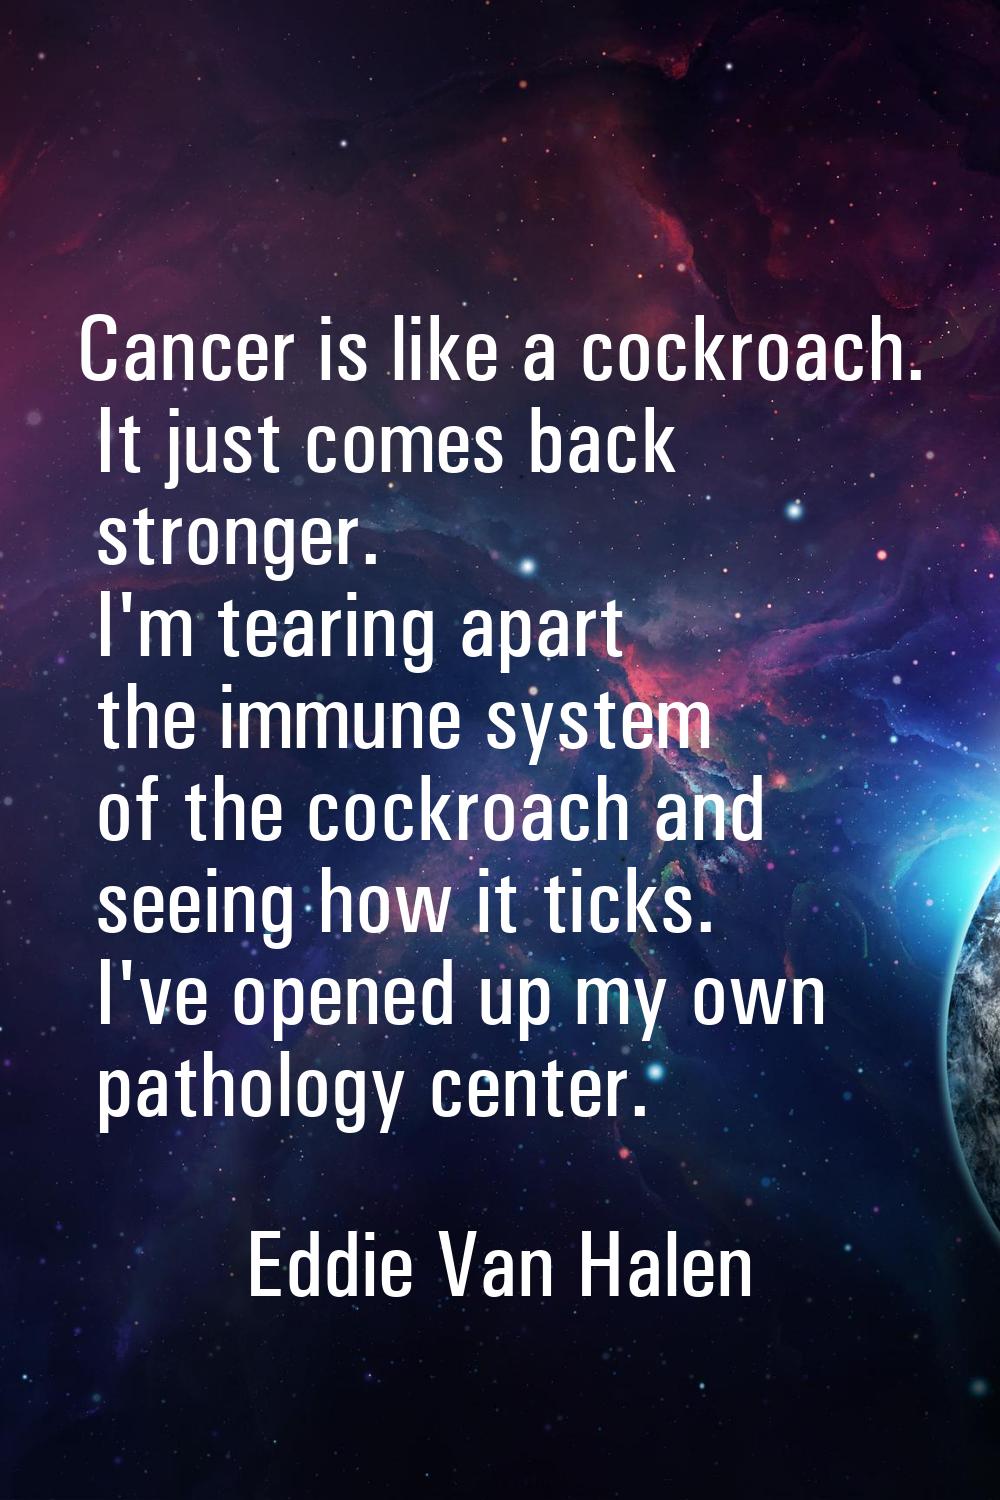 Cancer is like a cockroach. It just comes back stronger. I'm tearing apart the immune system of the